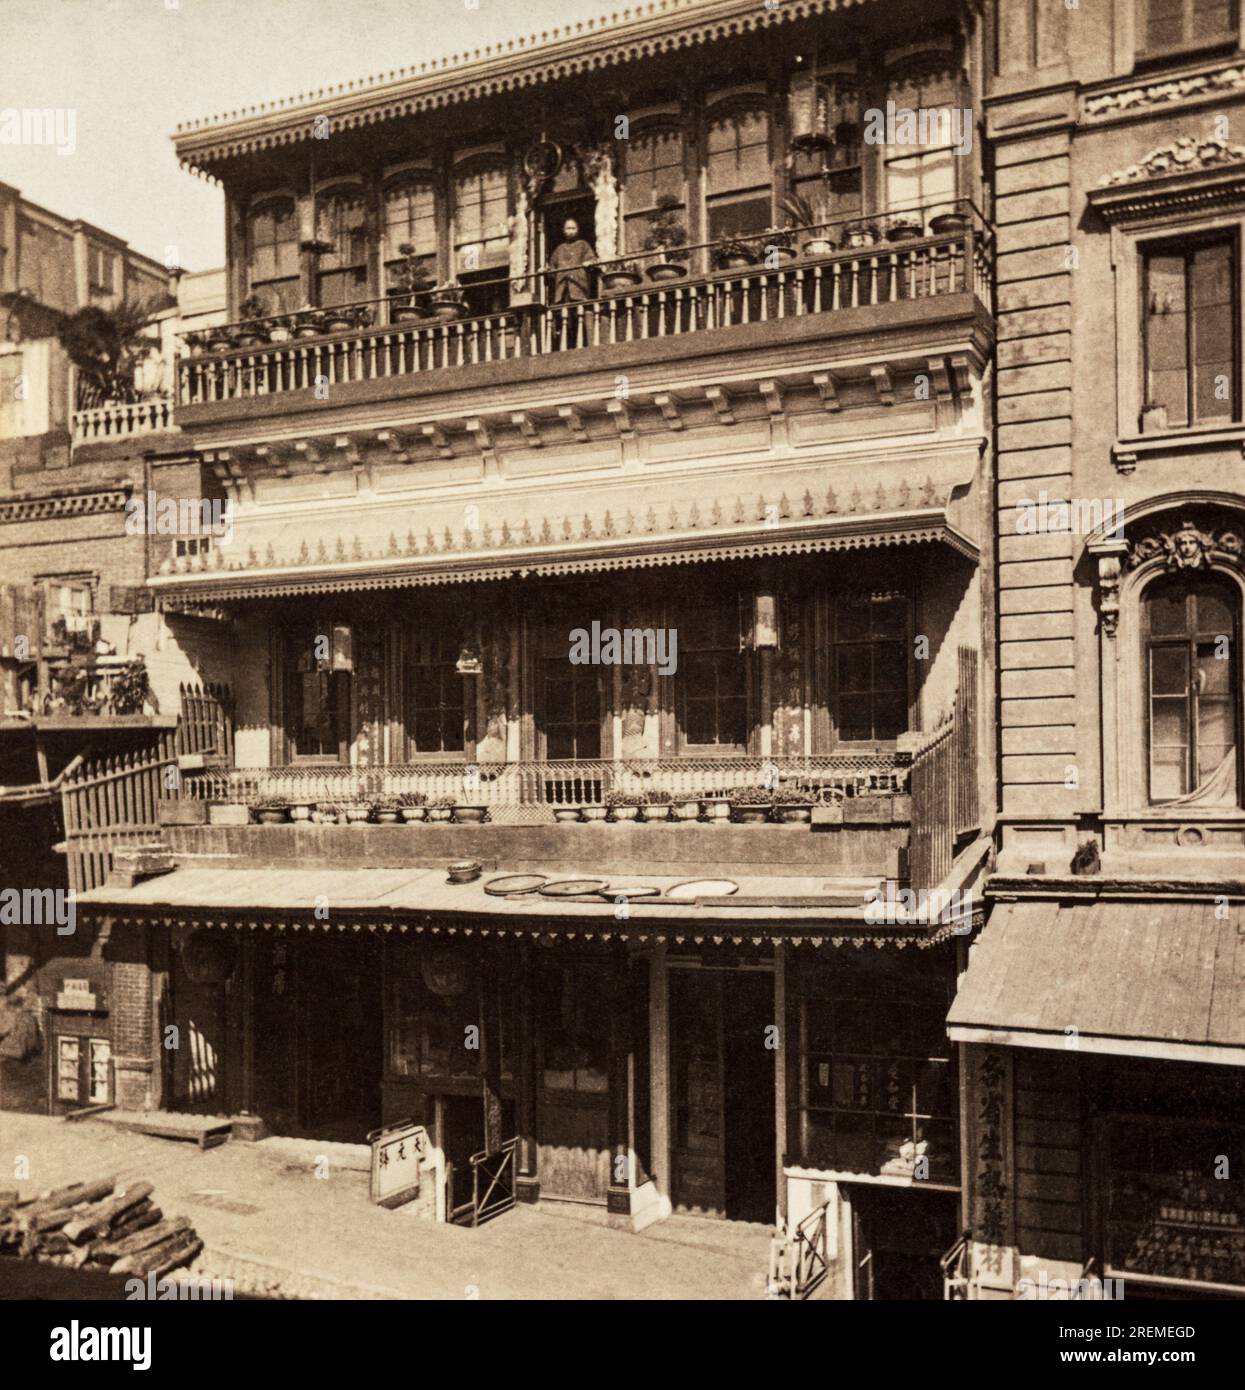 San Francisco, California:   c. 1880    A photograph of a Chinese restaurant on DuPont Ave near Sacramento Street from a Carleton Watkins stereocard.(DuPont Ave. is now Grant St.) Stock Photo